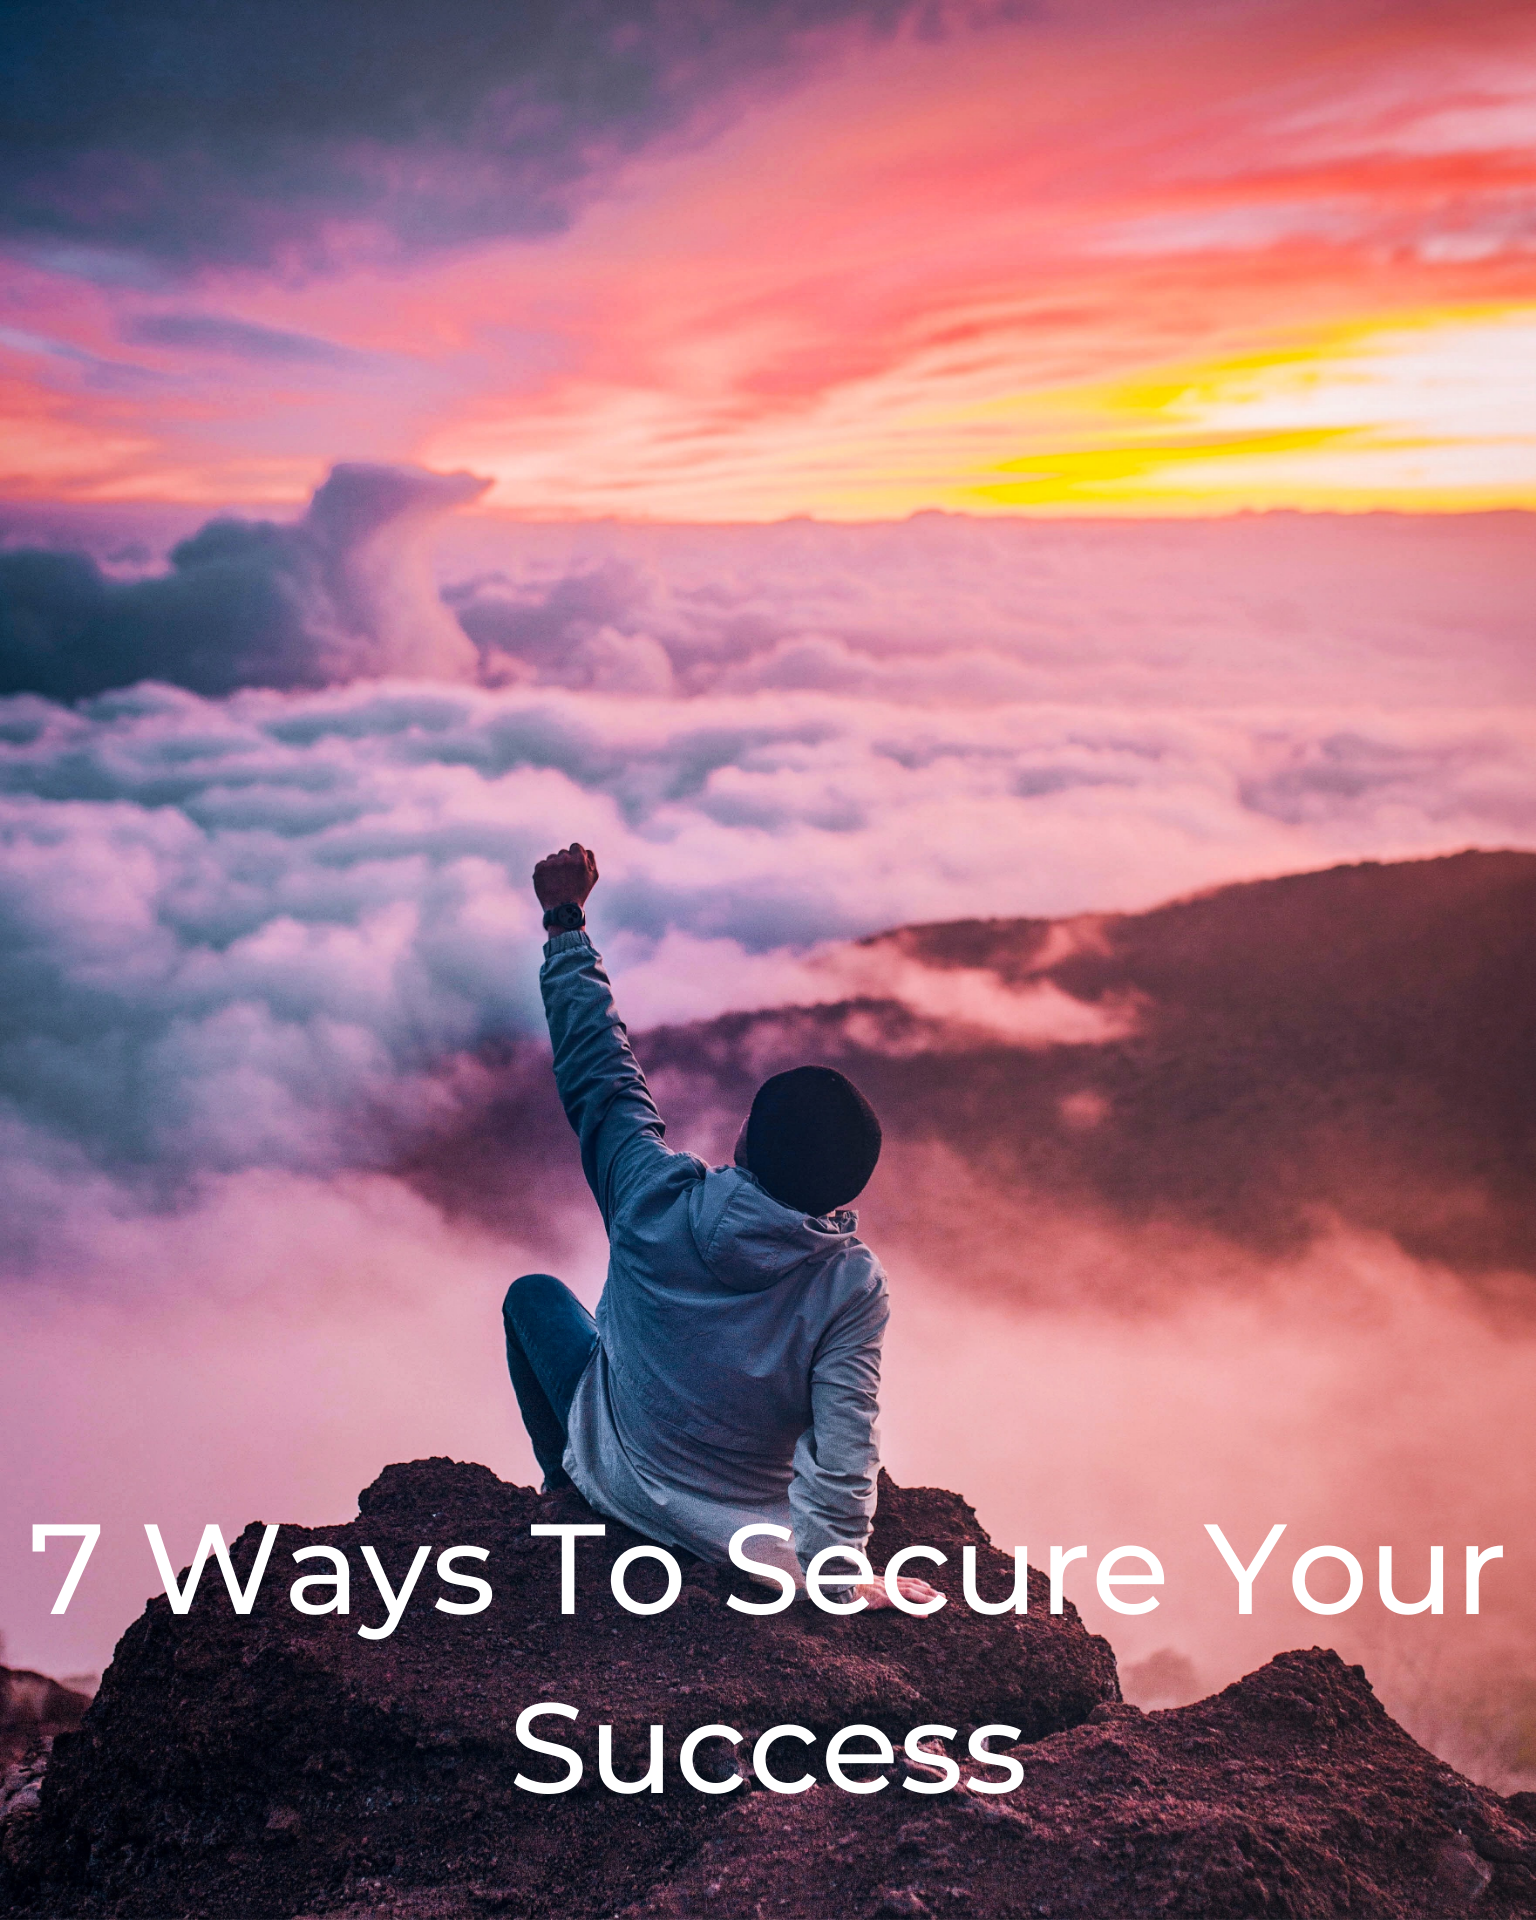 7 Ways To Secure Your Success